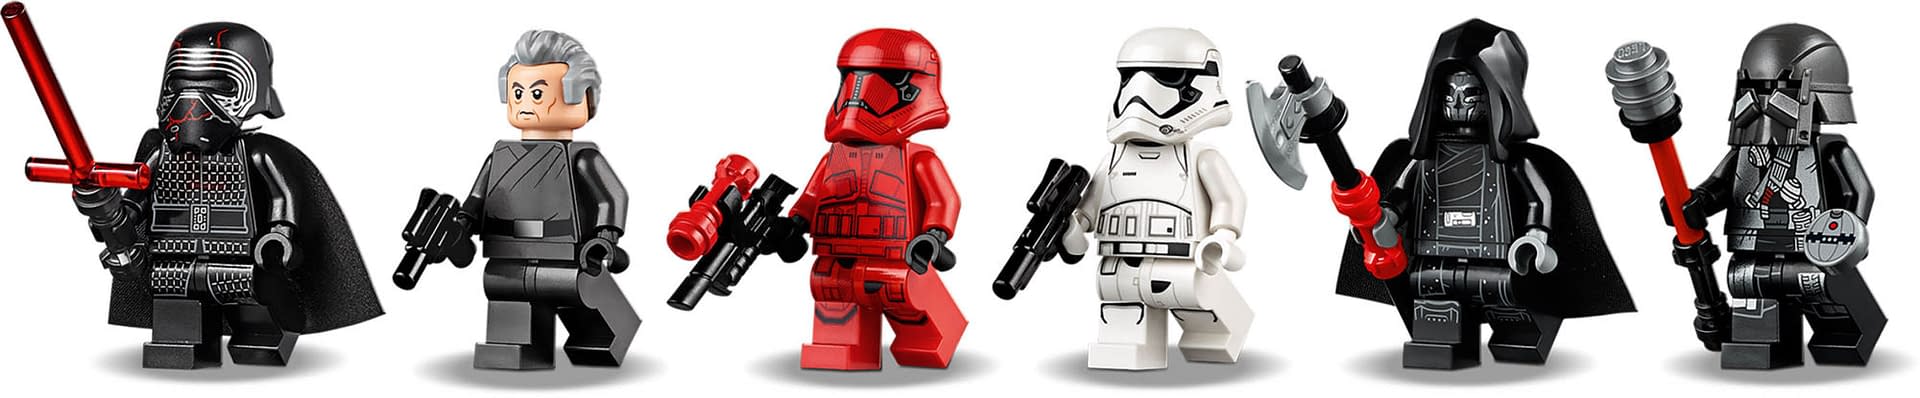 Star Wars Ships Get Their LEGO Debut for Triple Force Friday